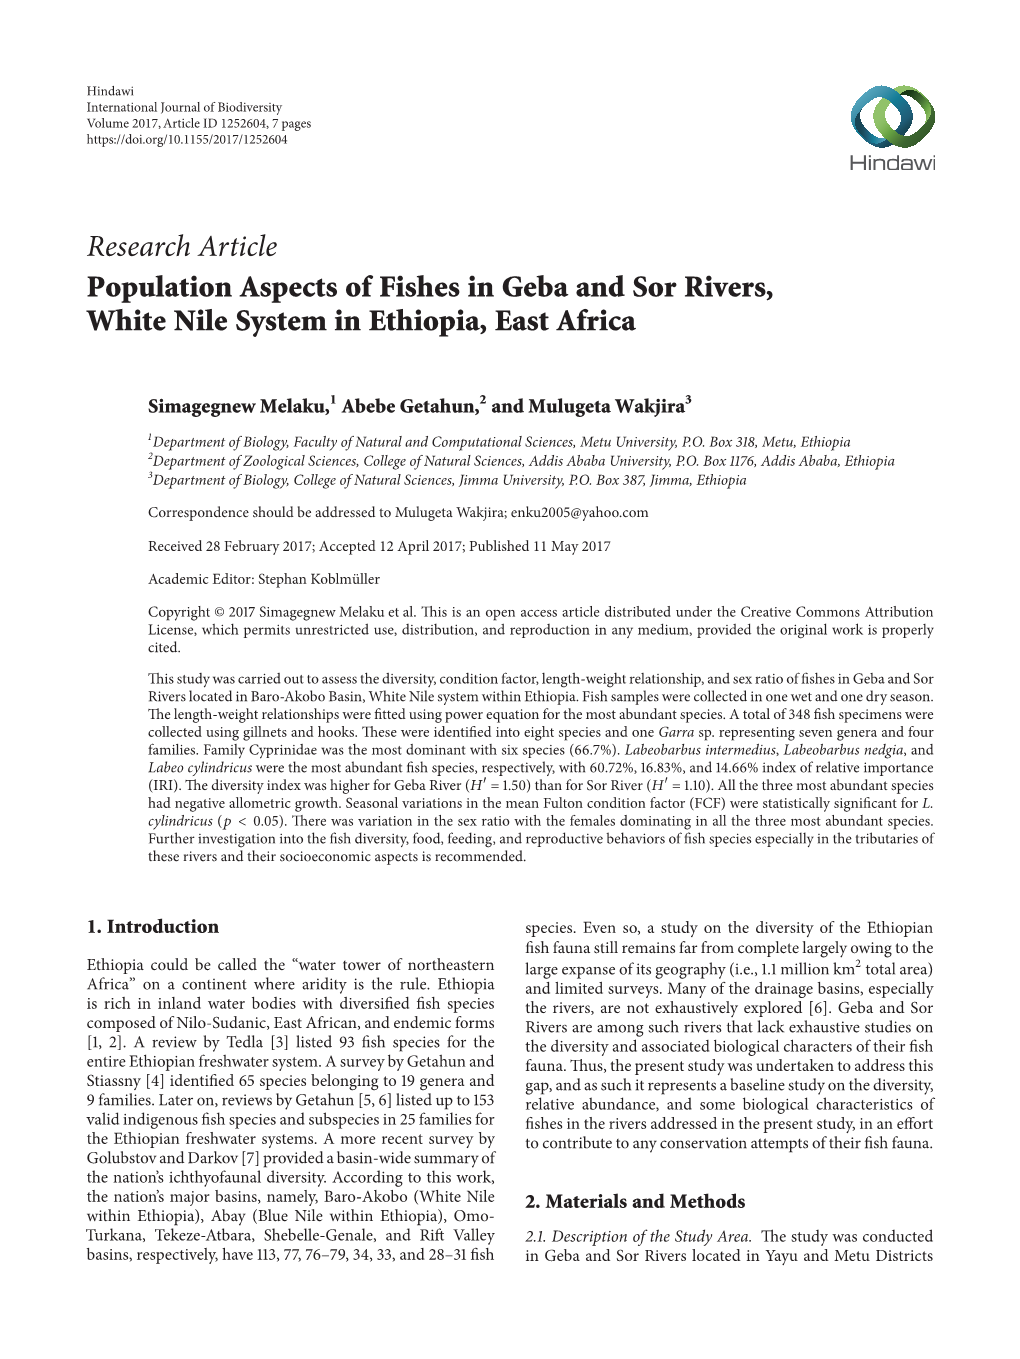 Population Aspects of Fishes in Geba and Sor Rivers, White Nile System in Ethiopia, East Africa